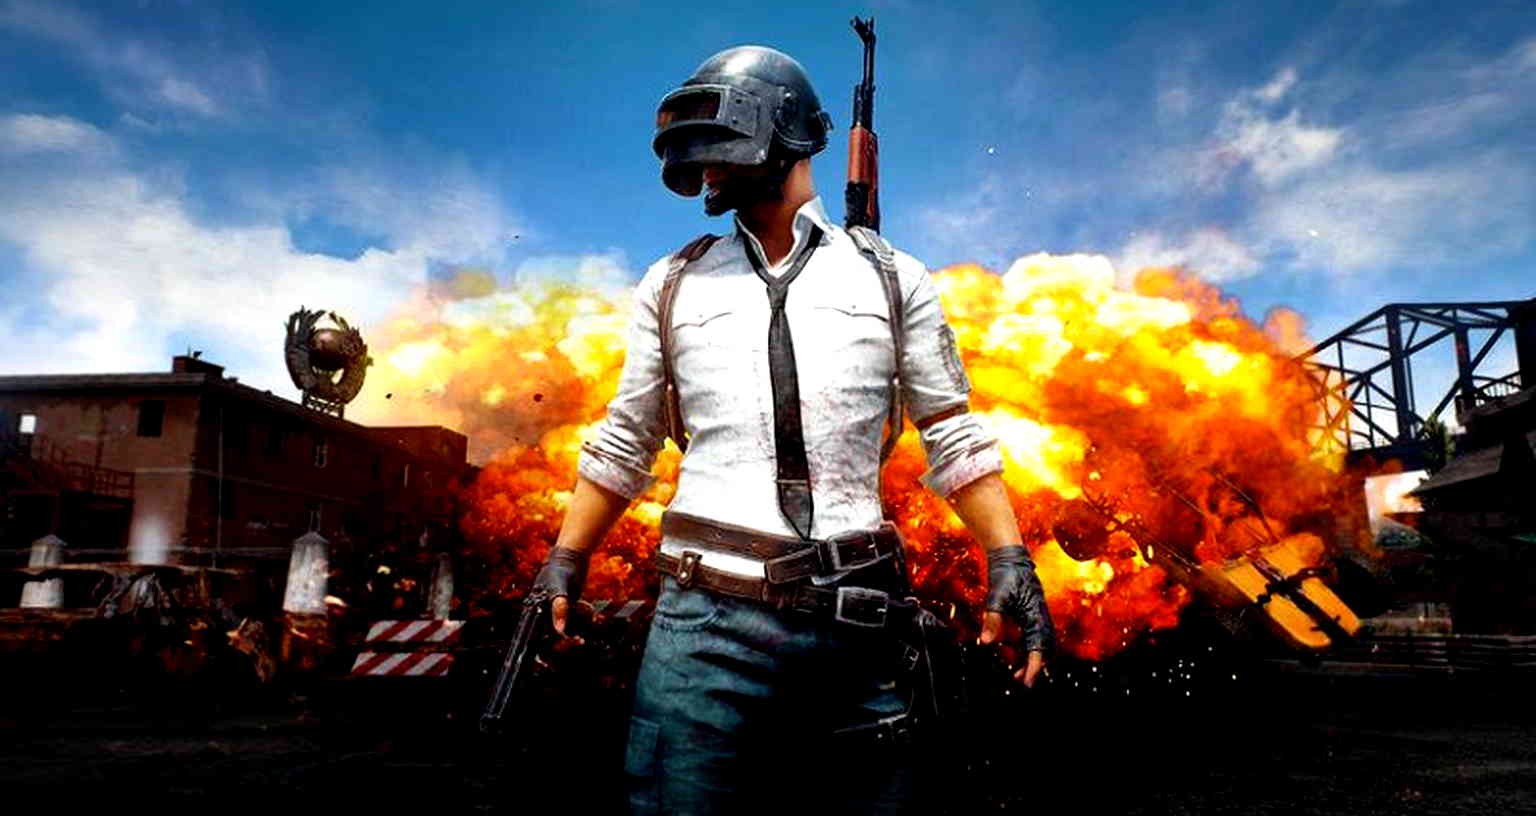 PUBG For The Chinese Market Will Be Infused With ‘Socialist Values’